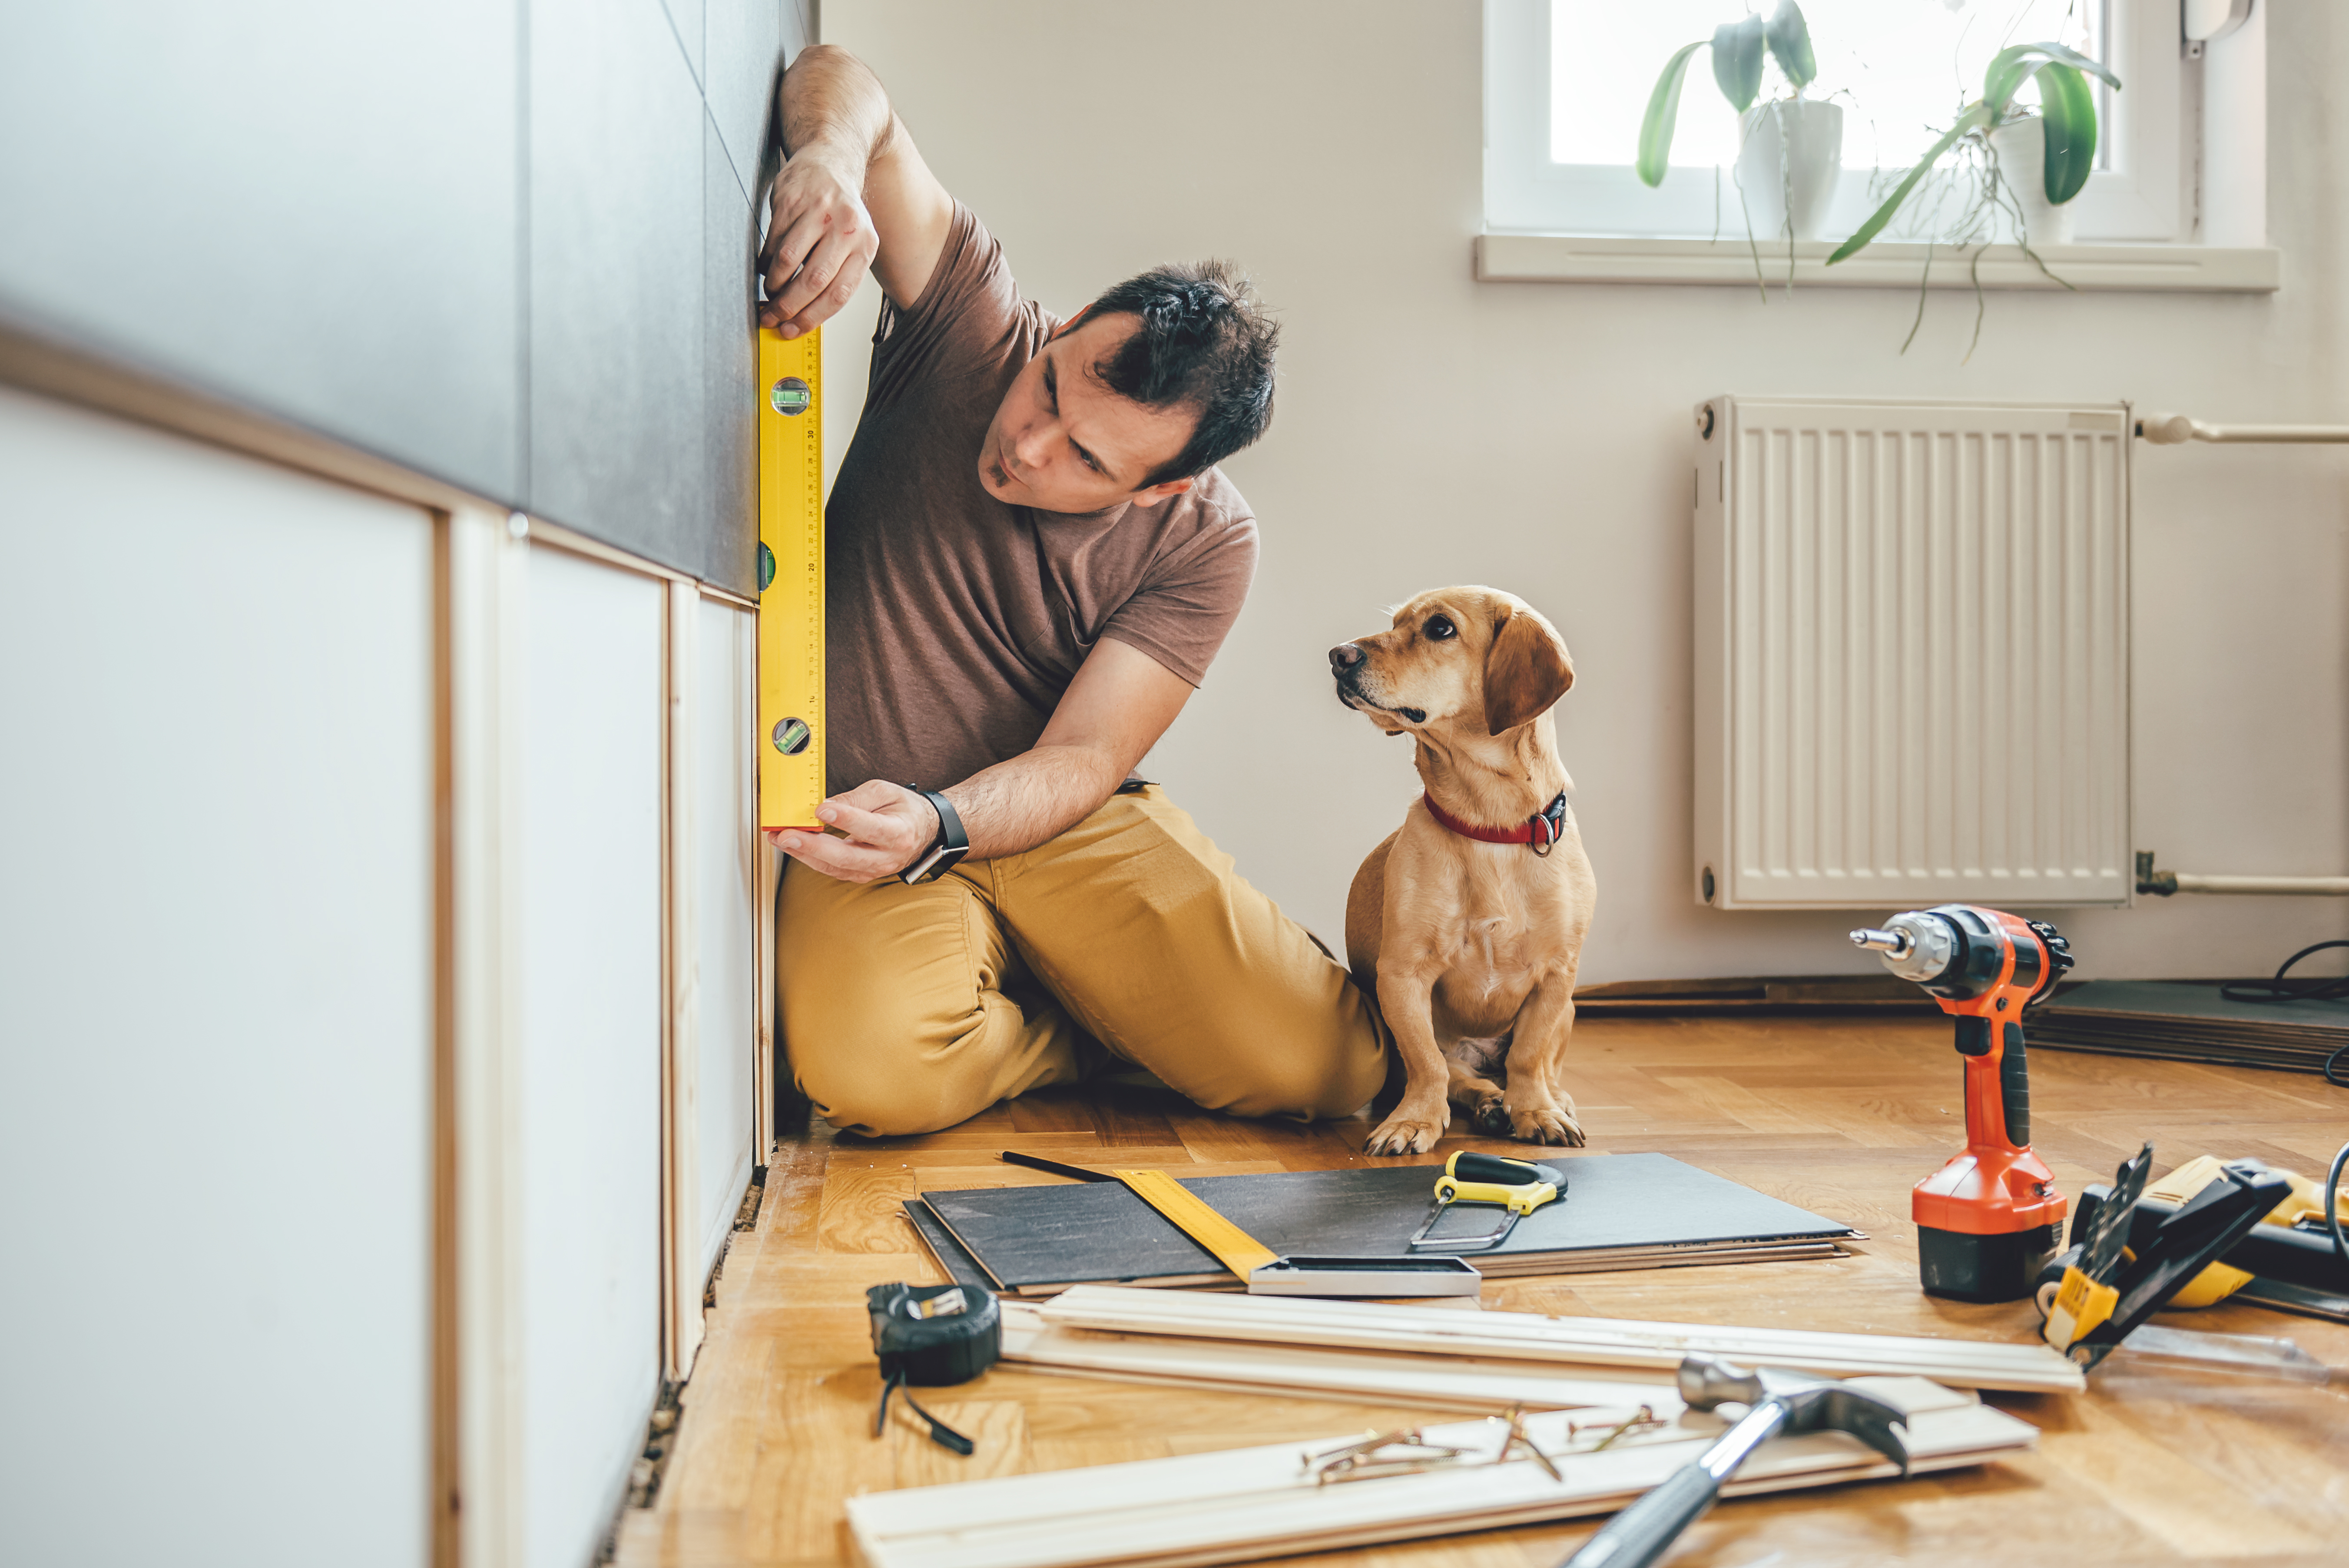 Man doing carpentry work while a dog looks at him